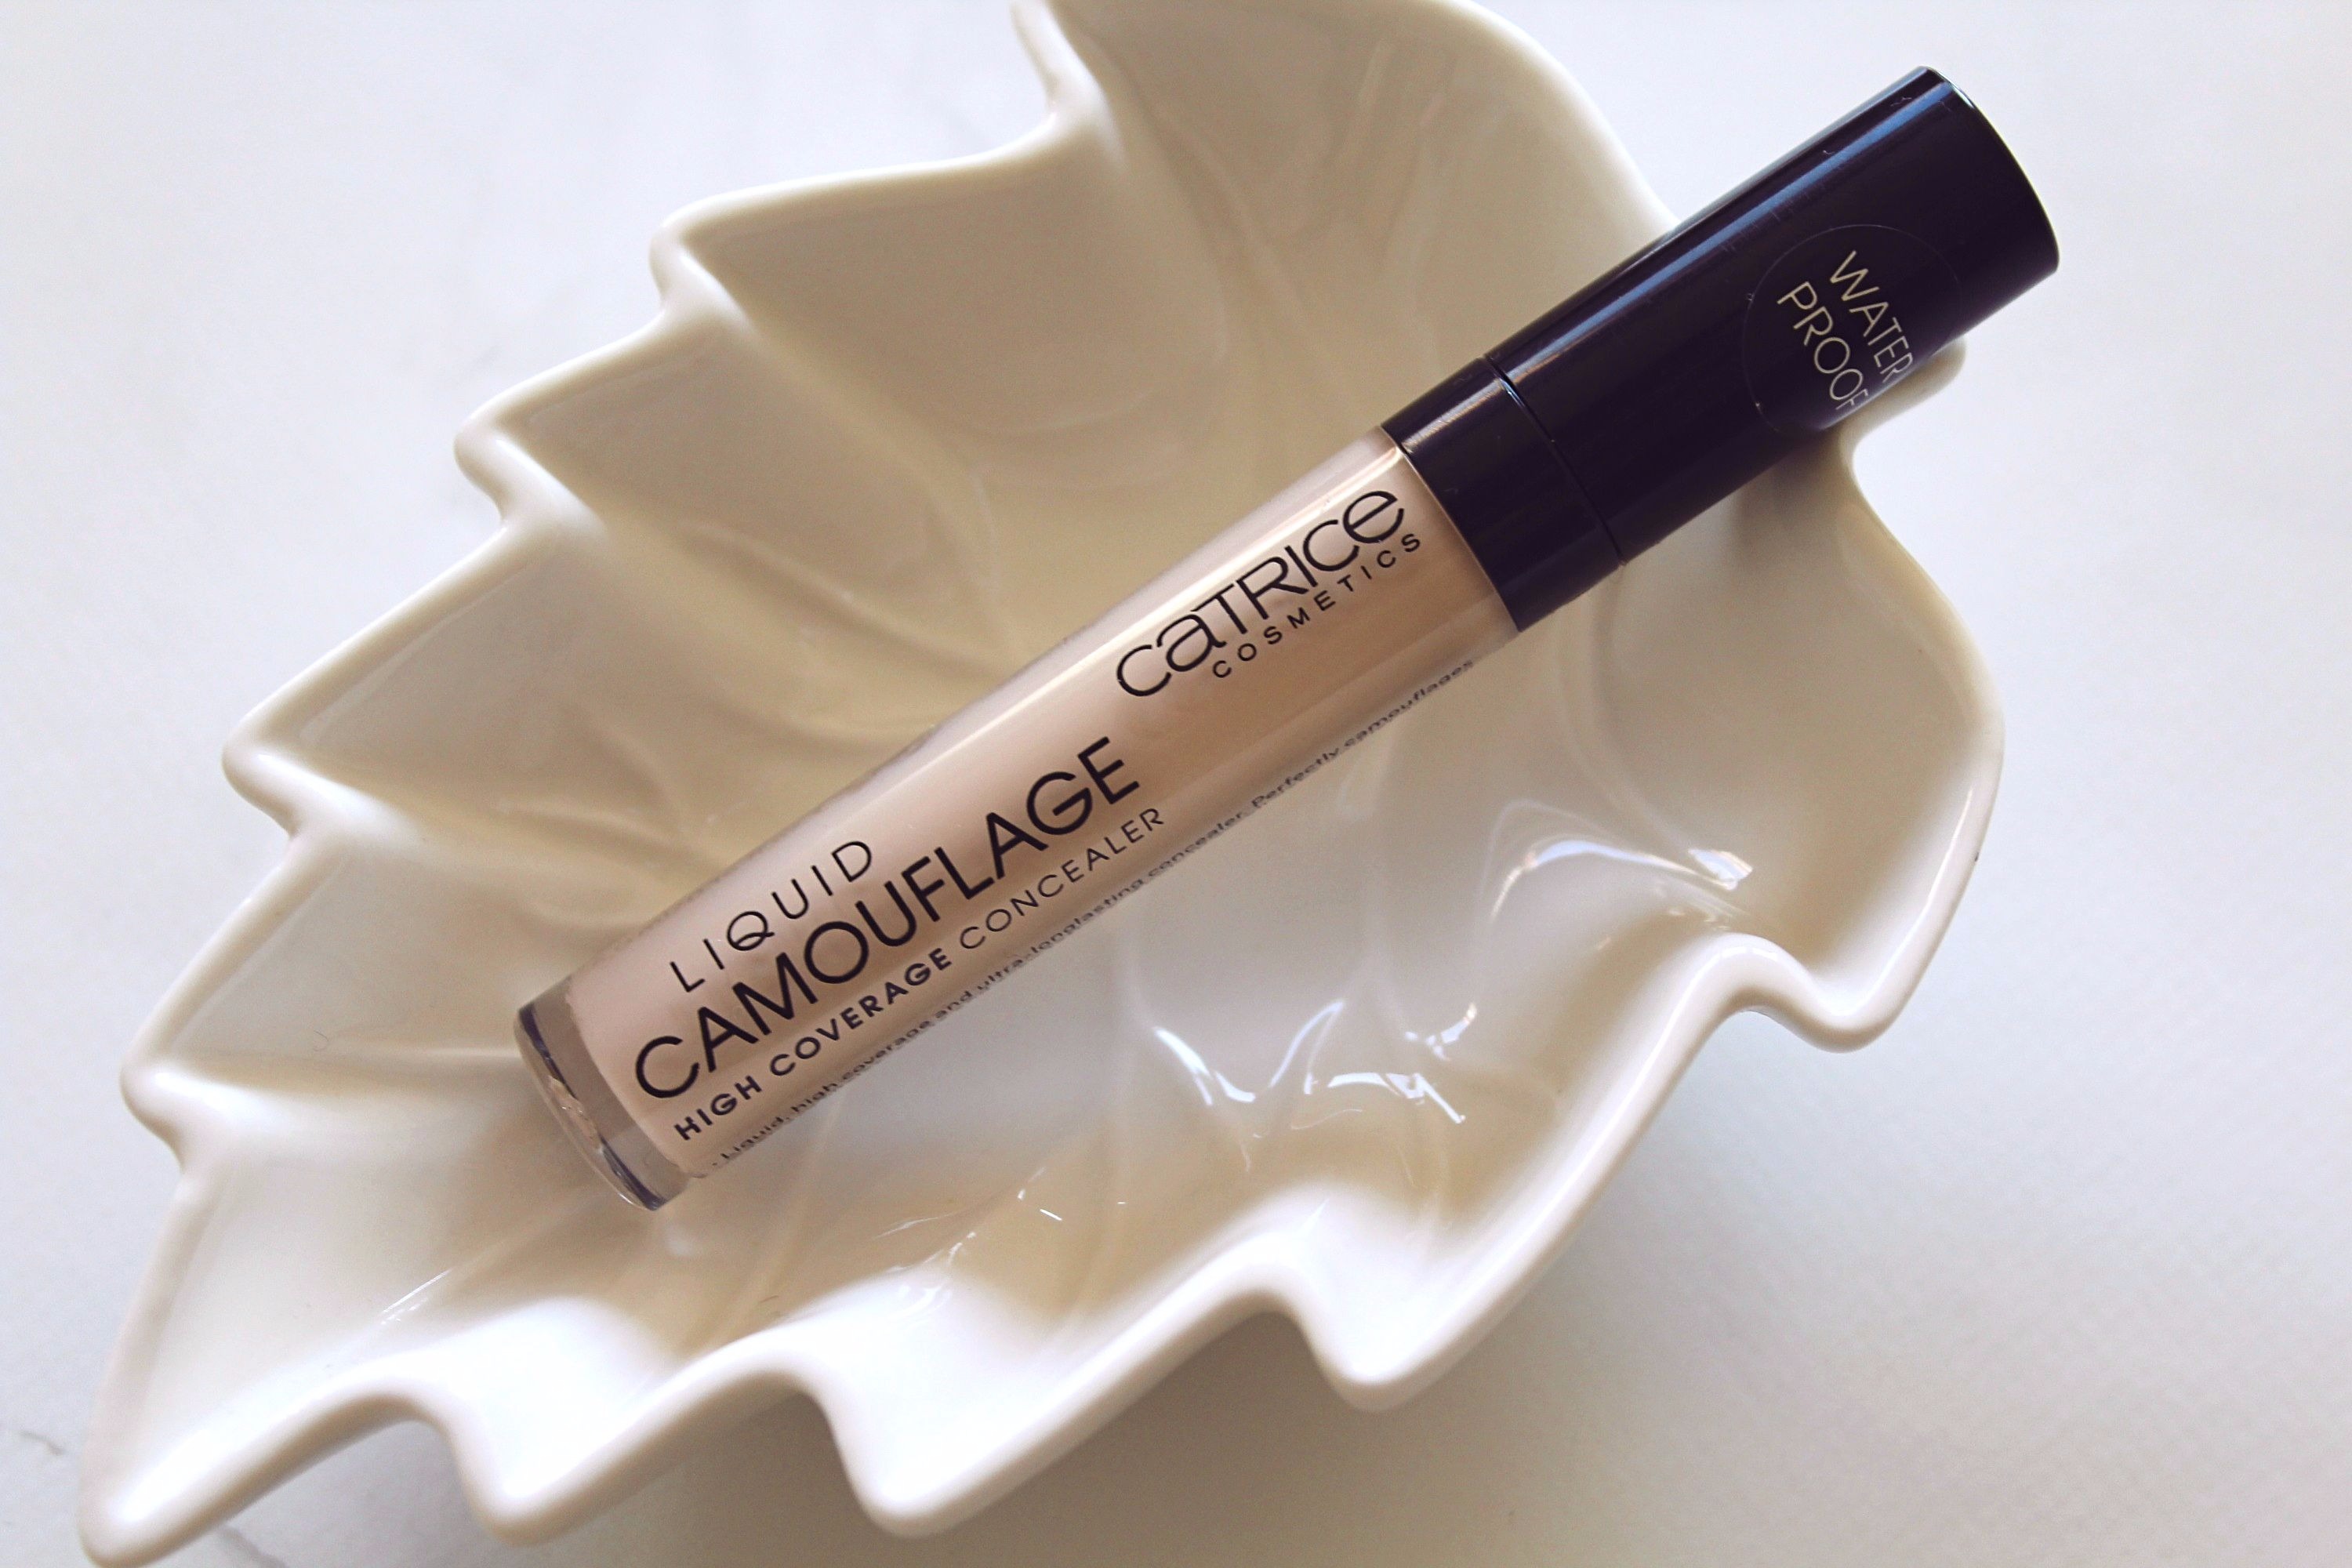 high Simple camouflage – coverage concealer Liquid review/recenzija Catrice Serenity